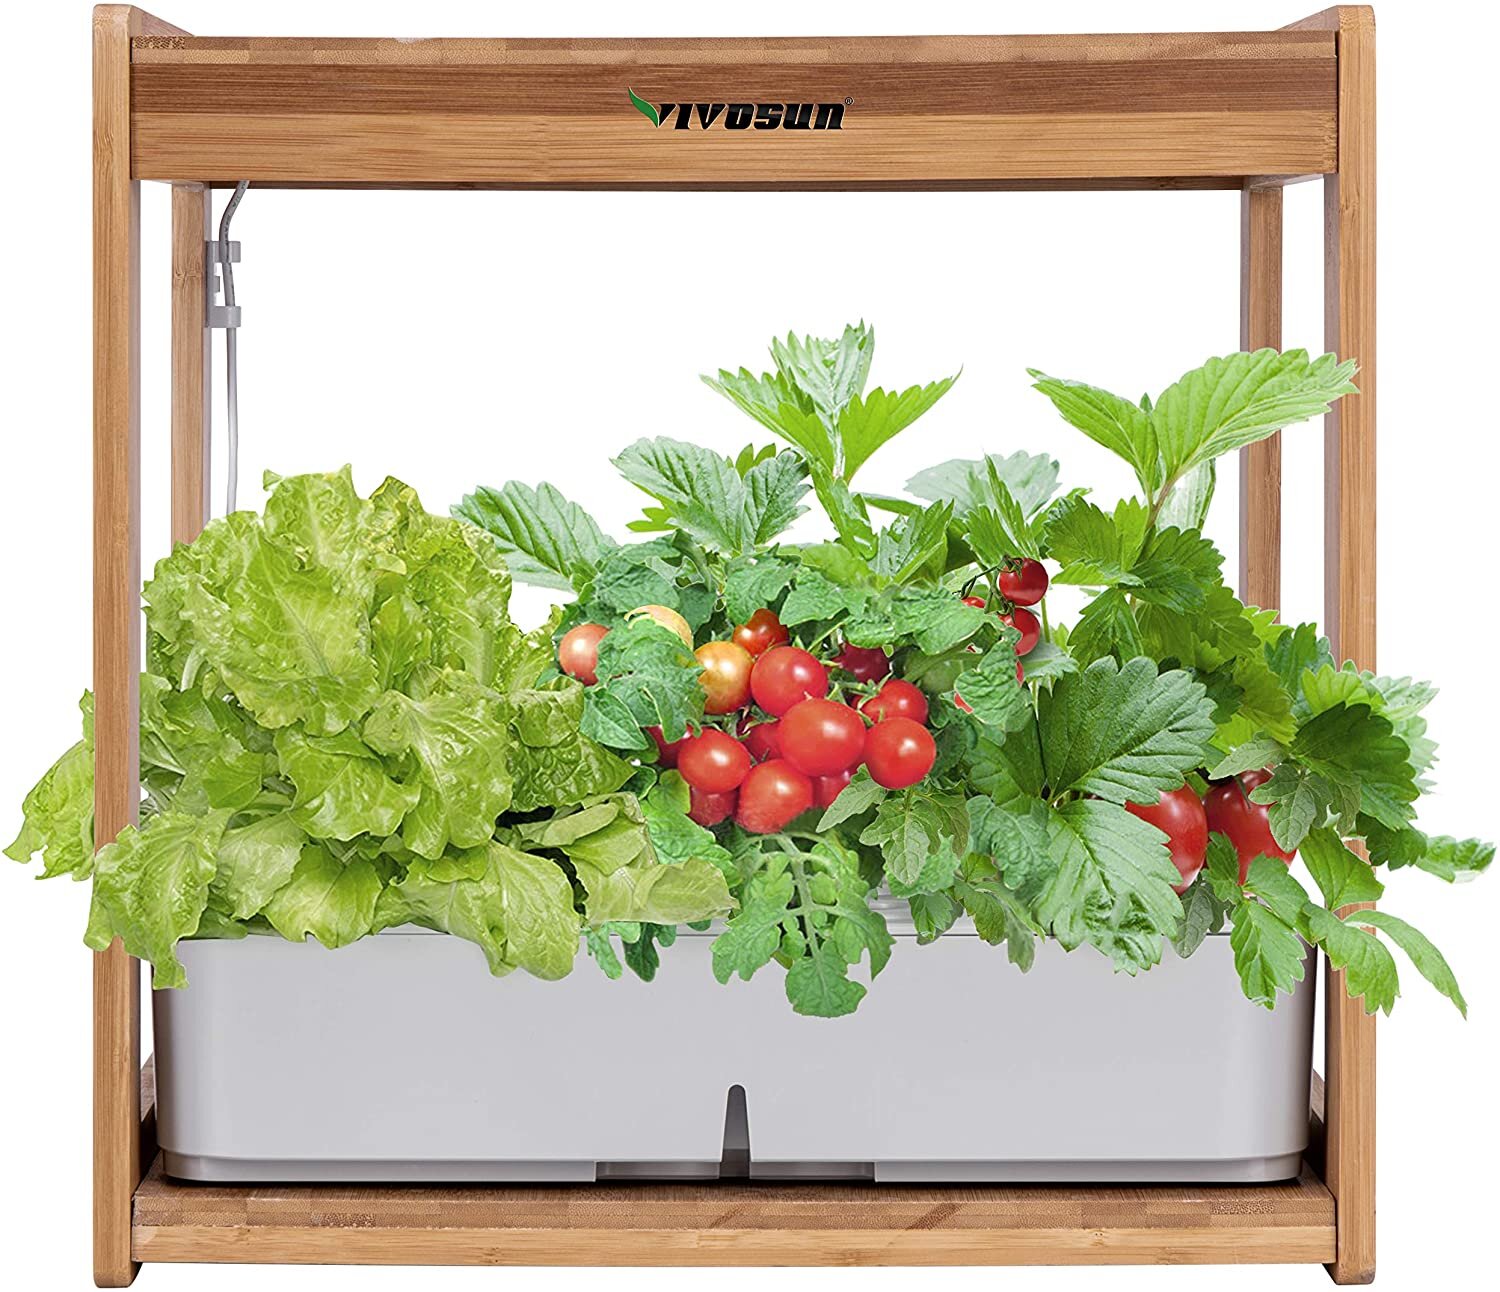 Details about   VIVOSUN 3-Head Plant Grow Light With tripod stand Indoor Plants Grow Hydroponics 